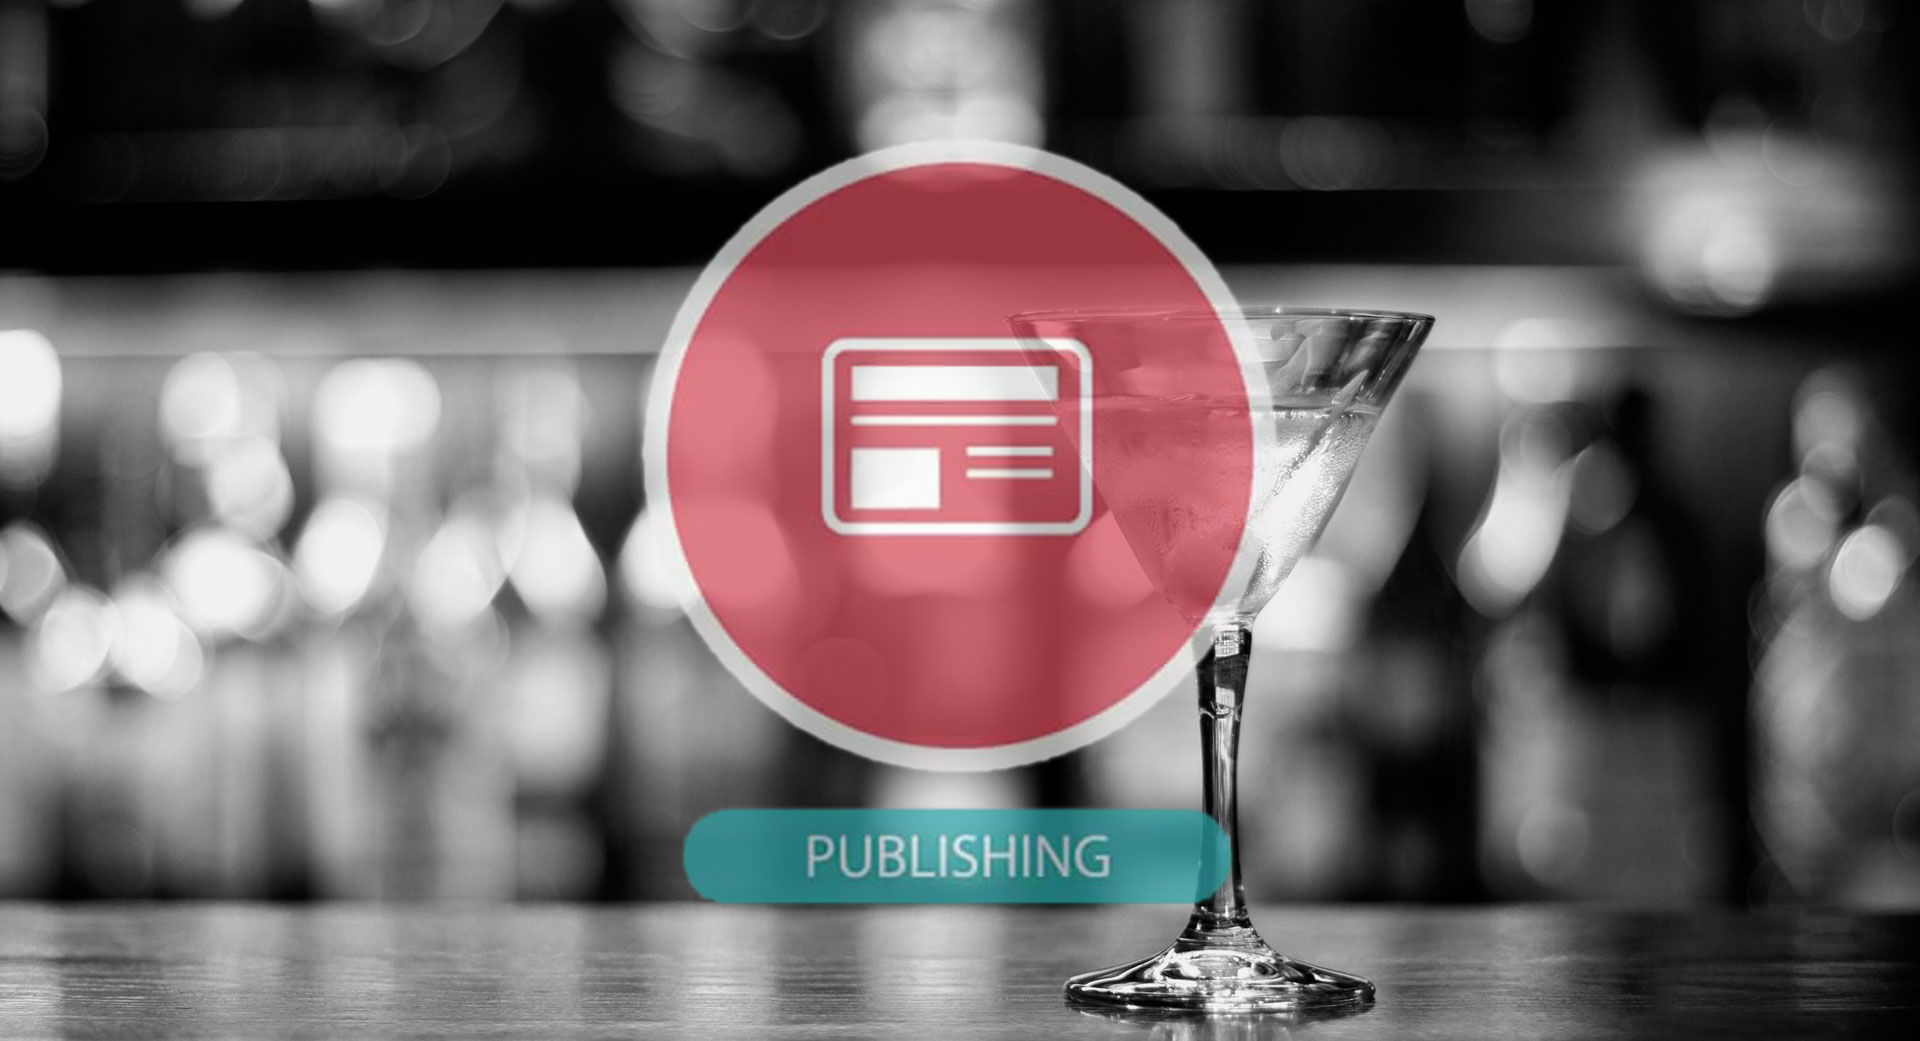 5-ways-to-promote-your-event-online-publishing